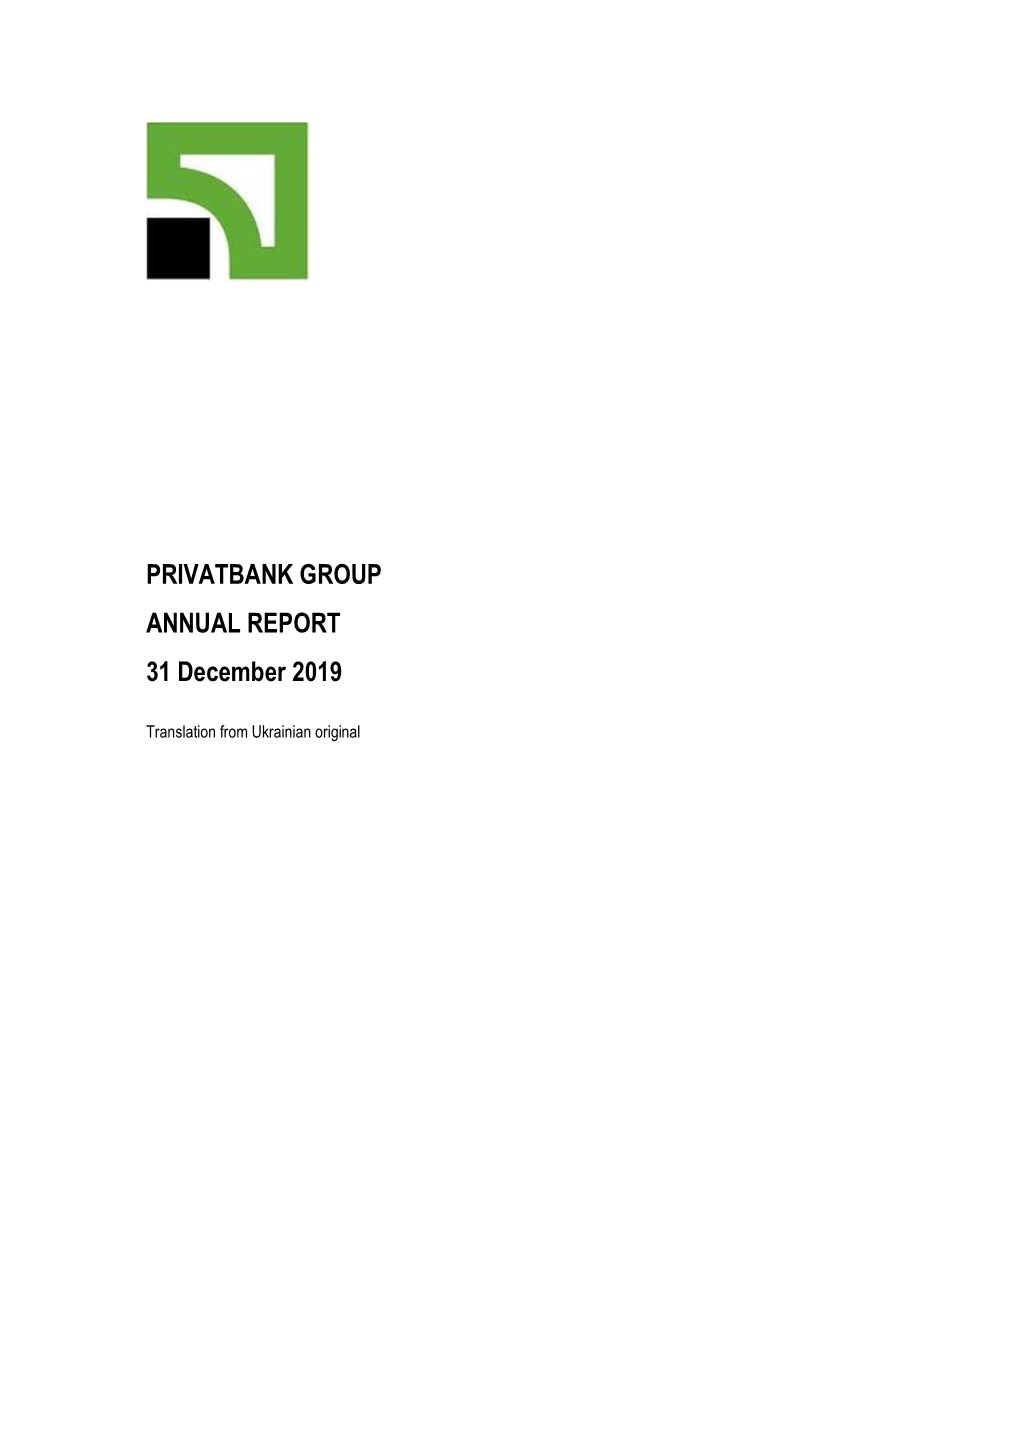 PRIVATBANK GROUP ANNUAL REPORT 31 December 2019